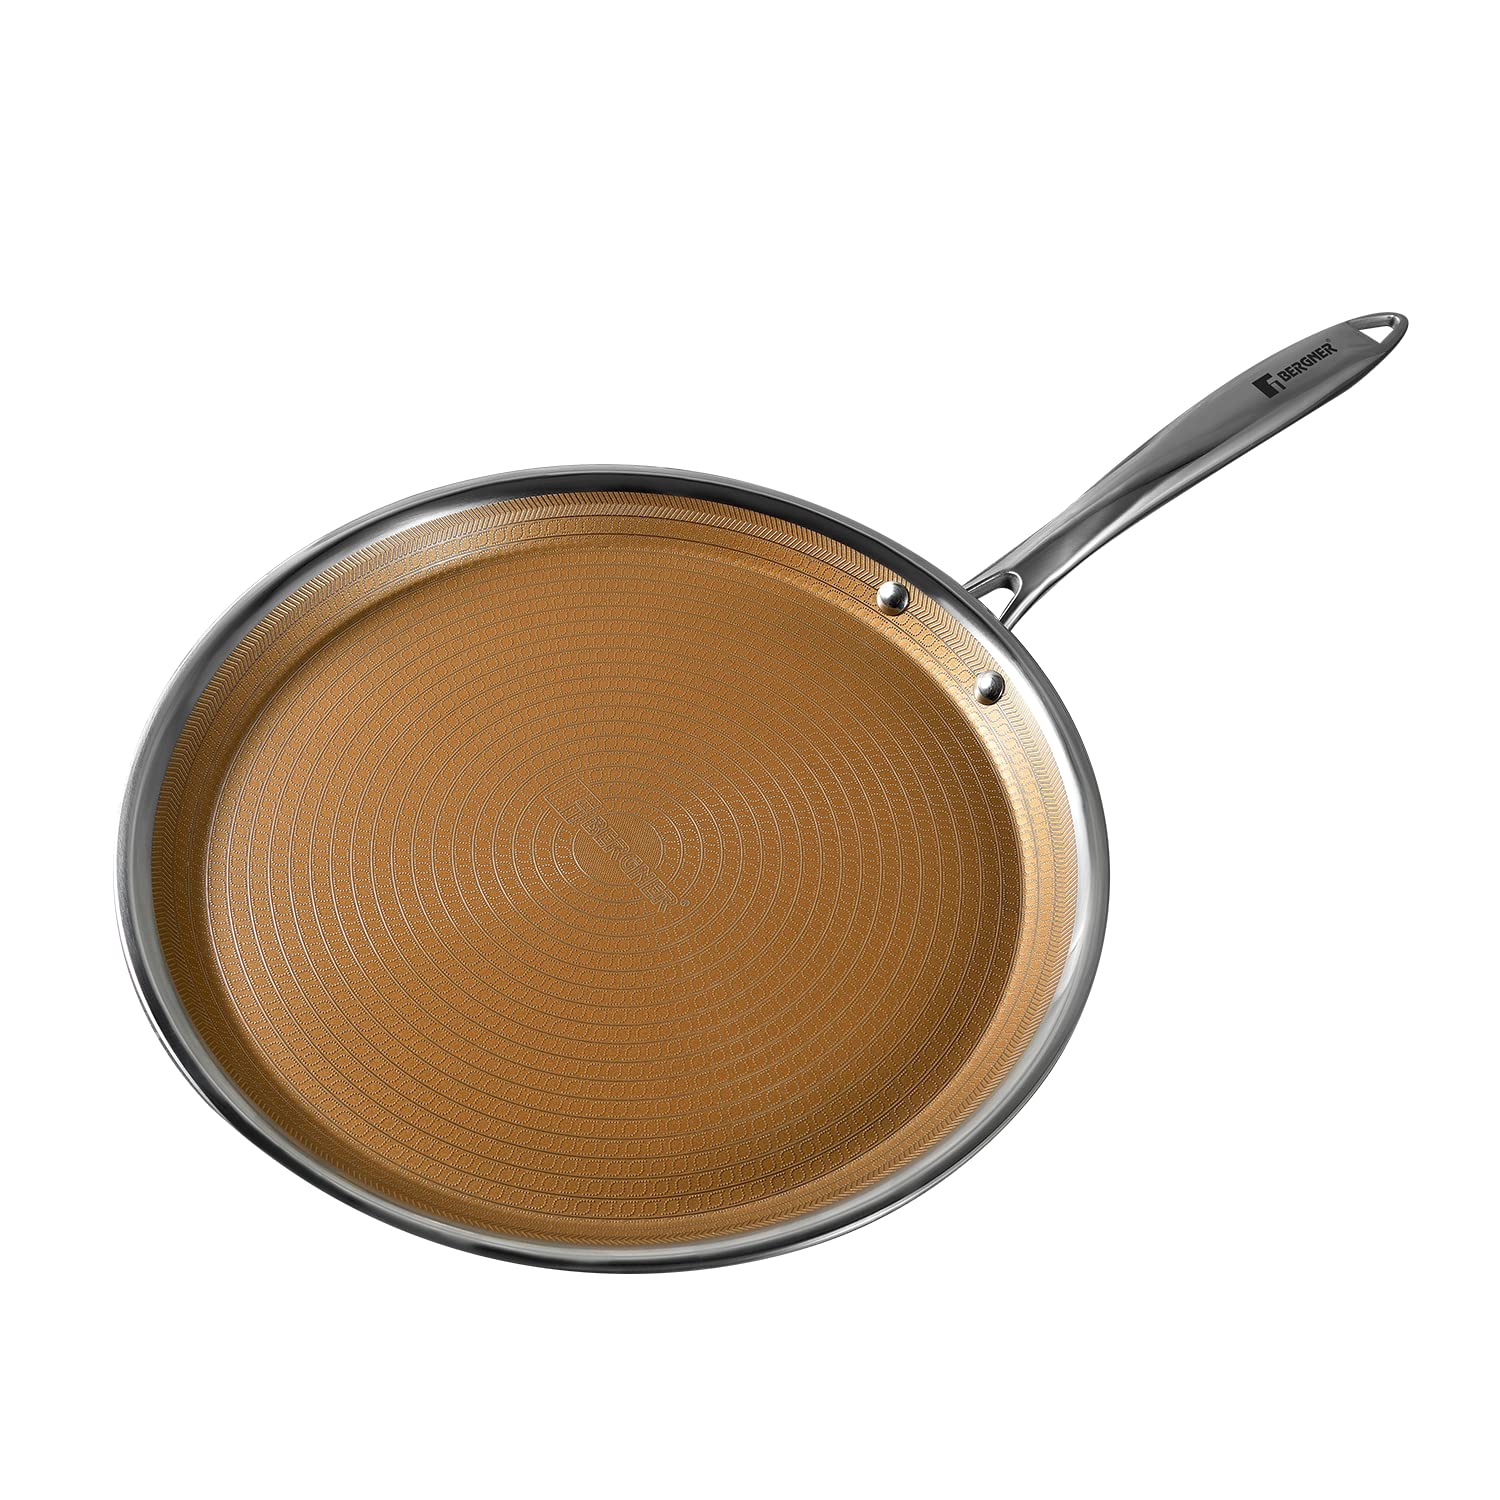 Bergner Hitech Triply Stainless Steel Scratch Resistant Non Stick